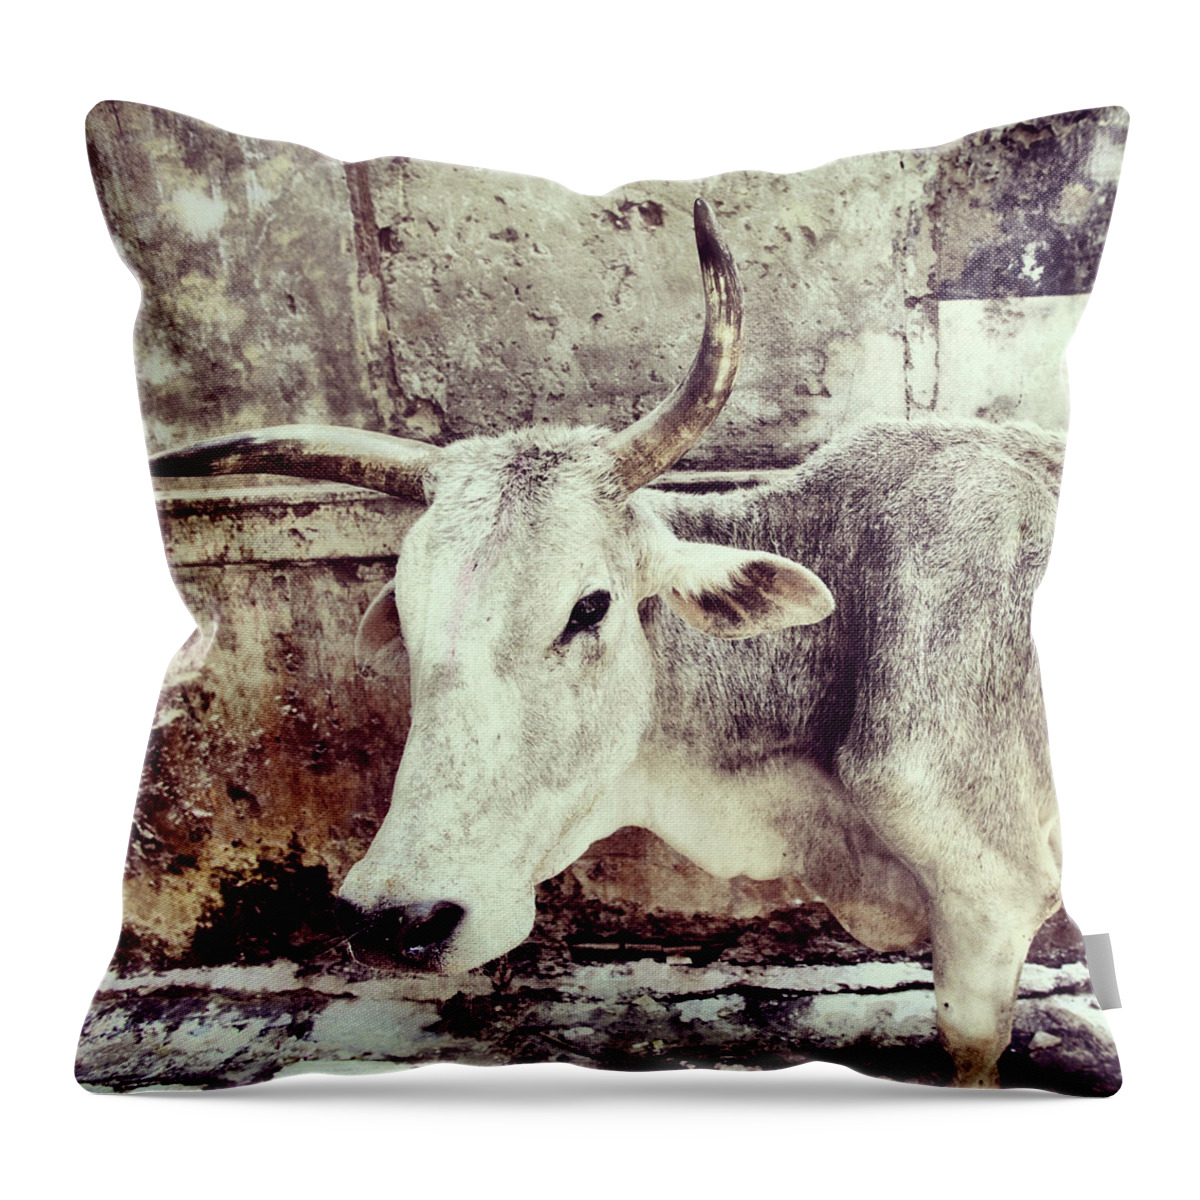 Hinduism Throw Pillow featuring the photograph Holly Cow by Ozgurdonmaz